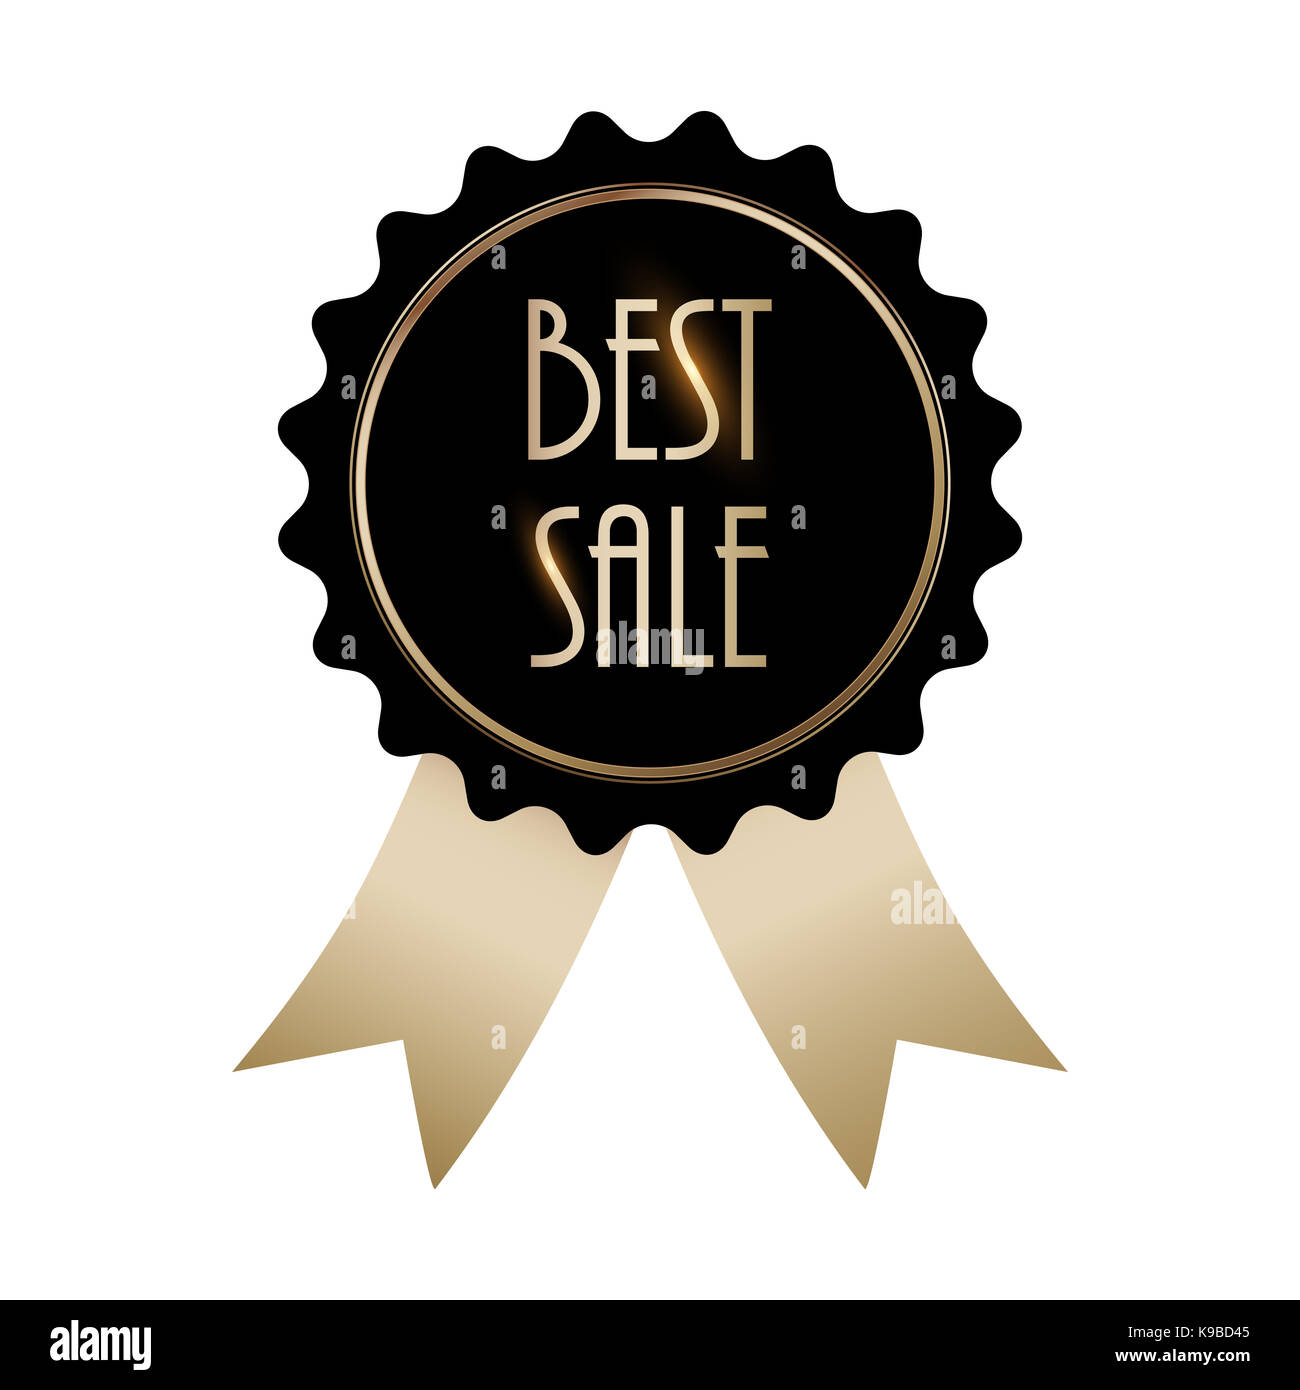 special business badge, advertisement label Stock Photo